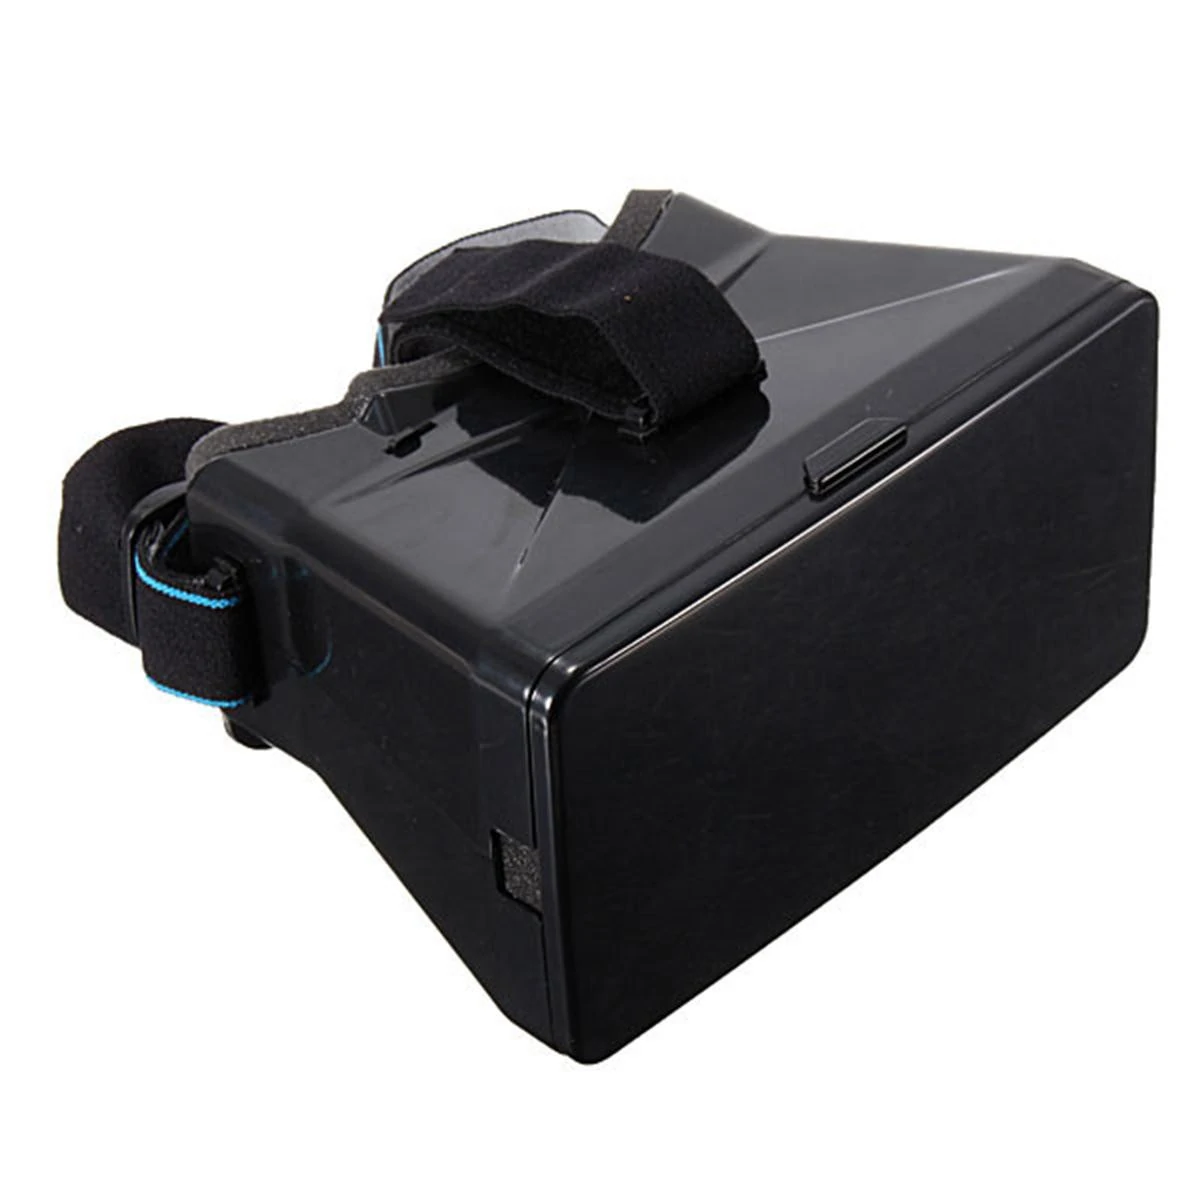 Find ELEGIANT Virtual Reality VR Glasses for Mobile Phone 3D Glass Wearing Stereoscopic Head Wear 3D Glasses for Sale on Gipsybee.com